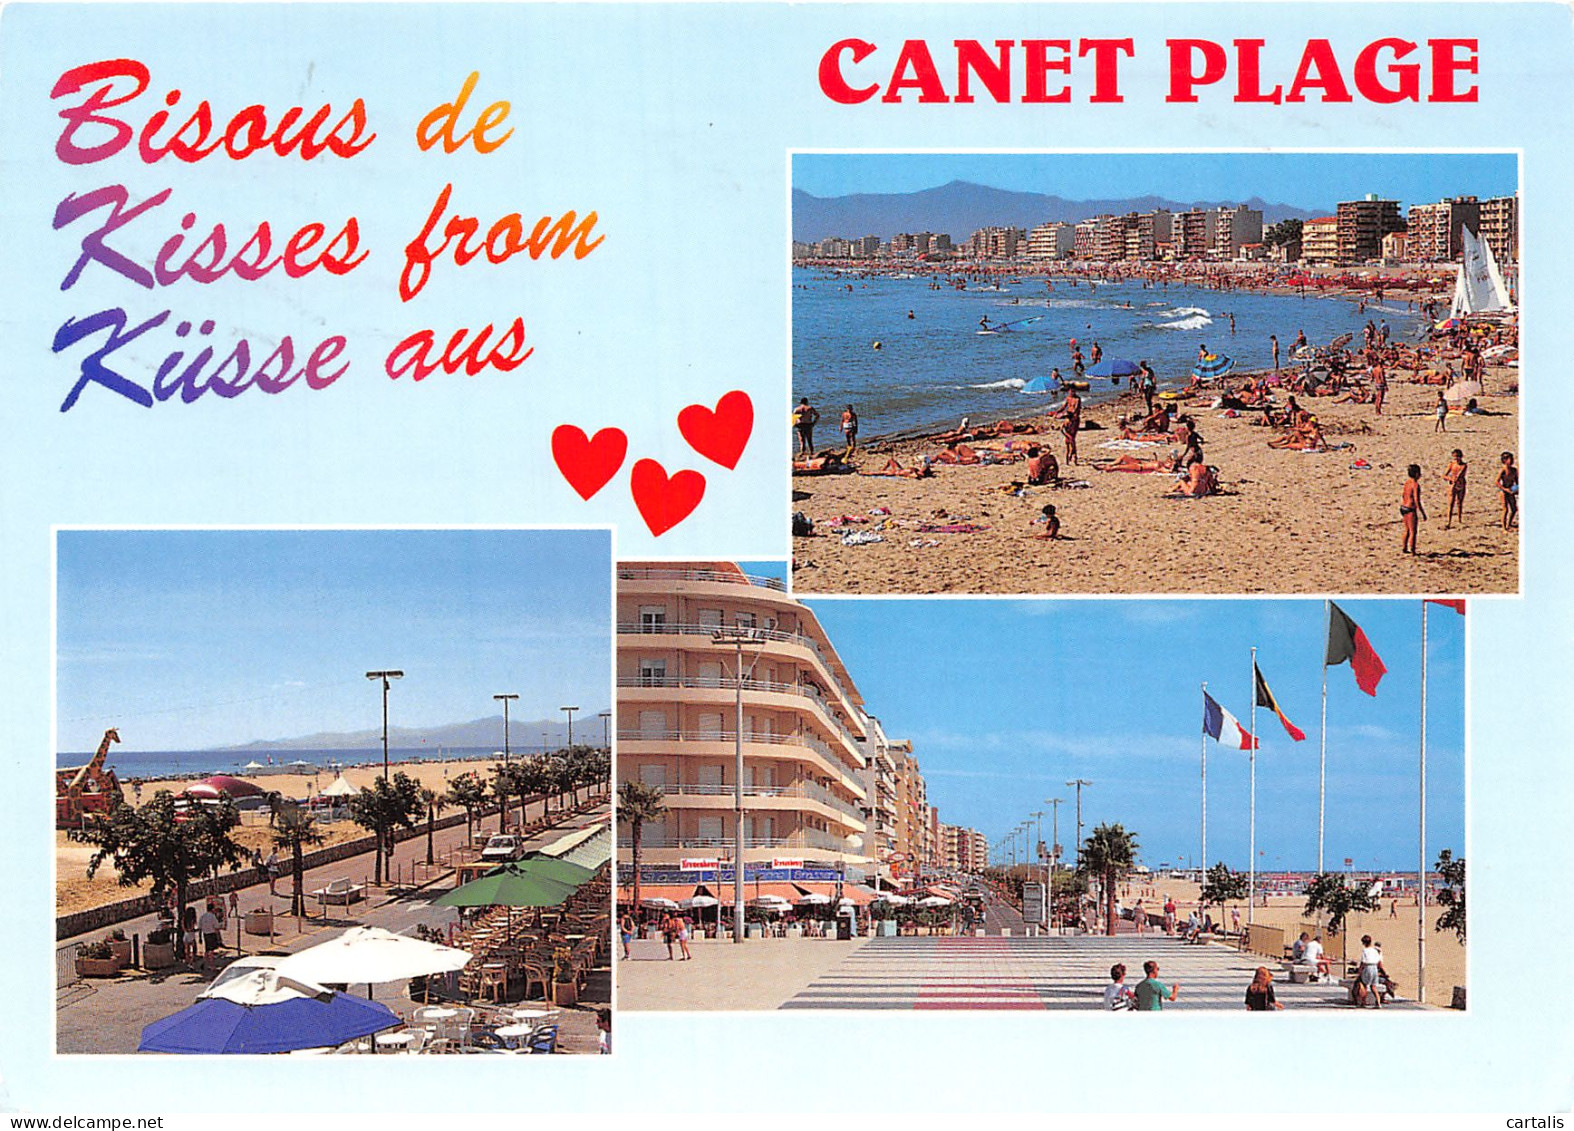 66-CANET PLAGE-N°4152-A/0161 - Canet Plage